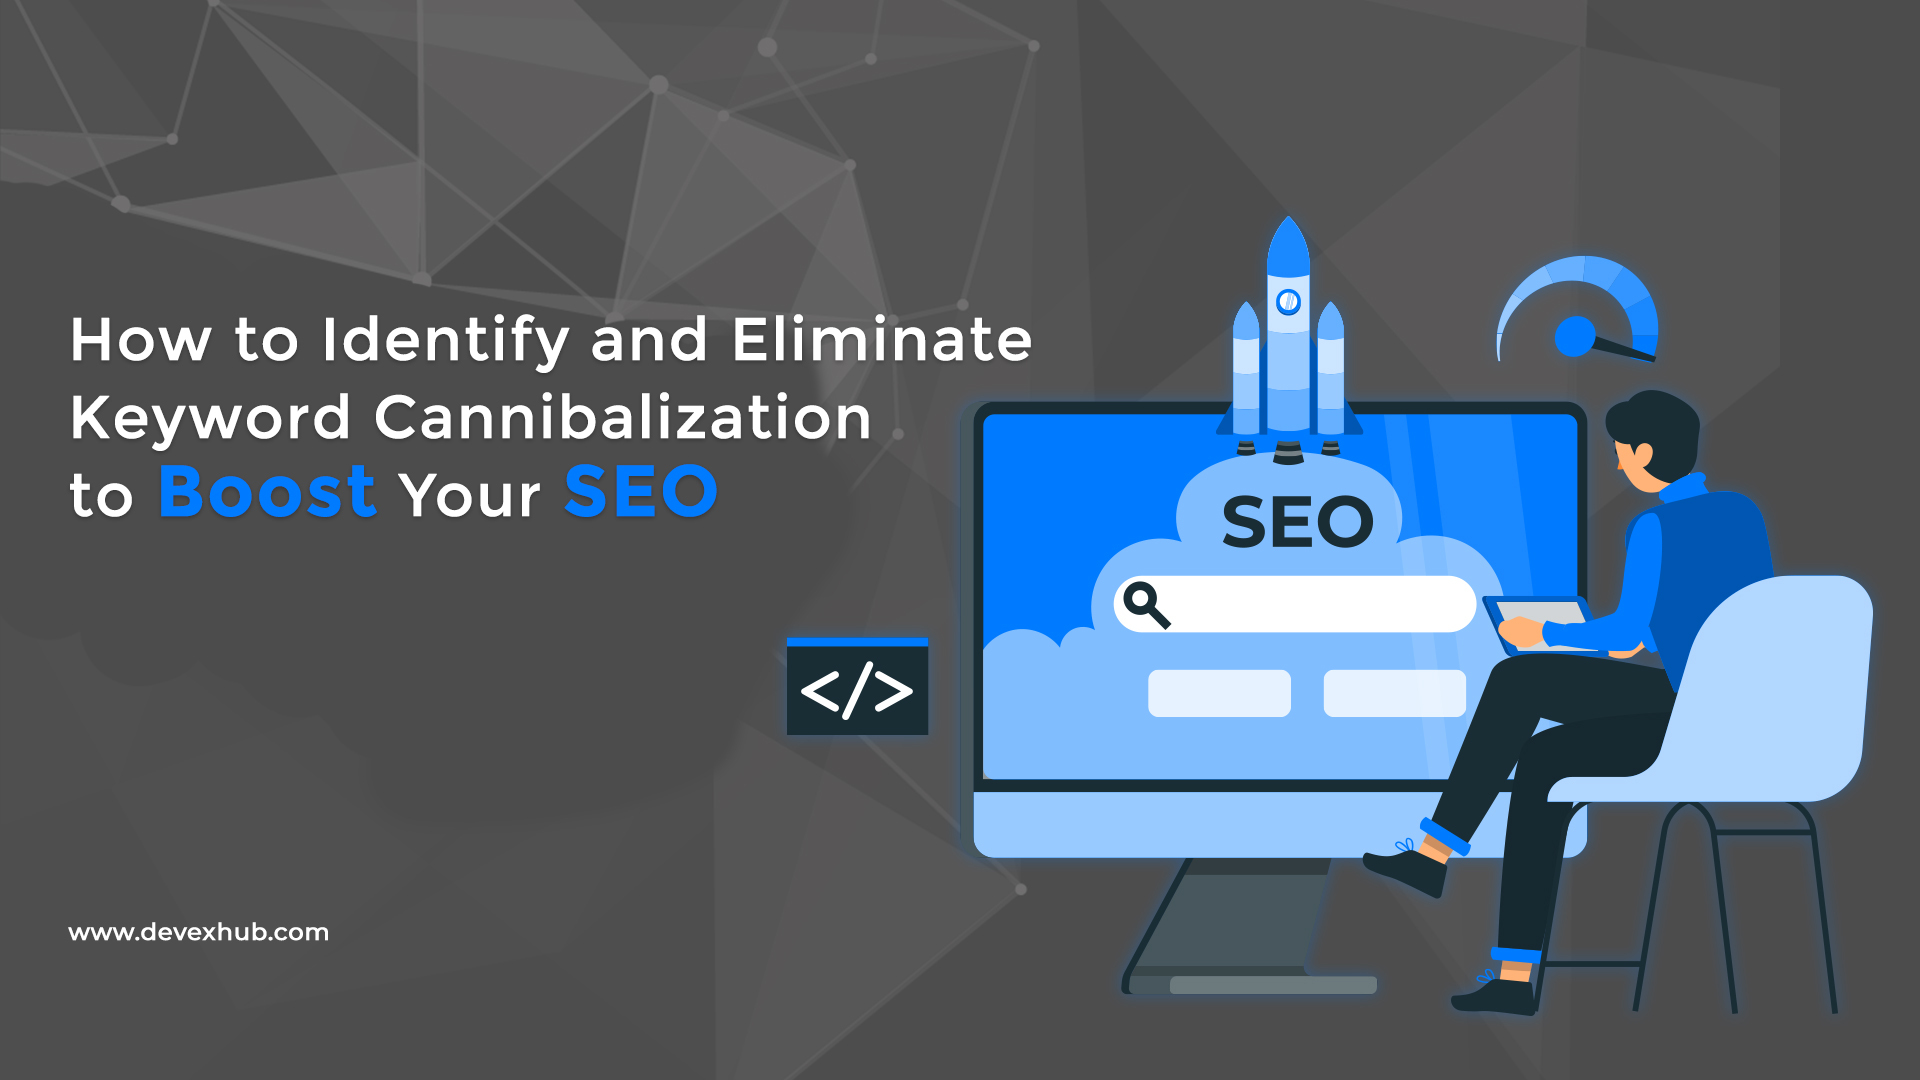 How to Identify and Eliminate Keyword Cannibalization to Boost Your SEO